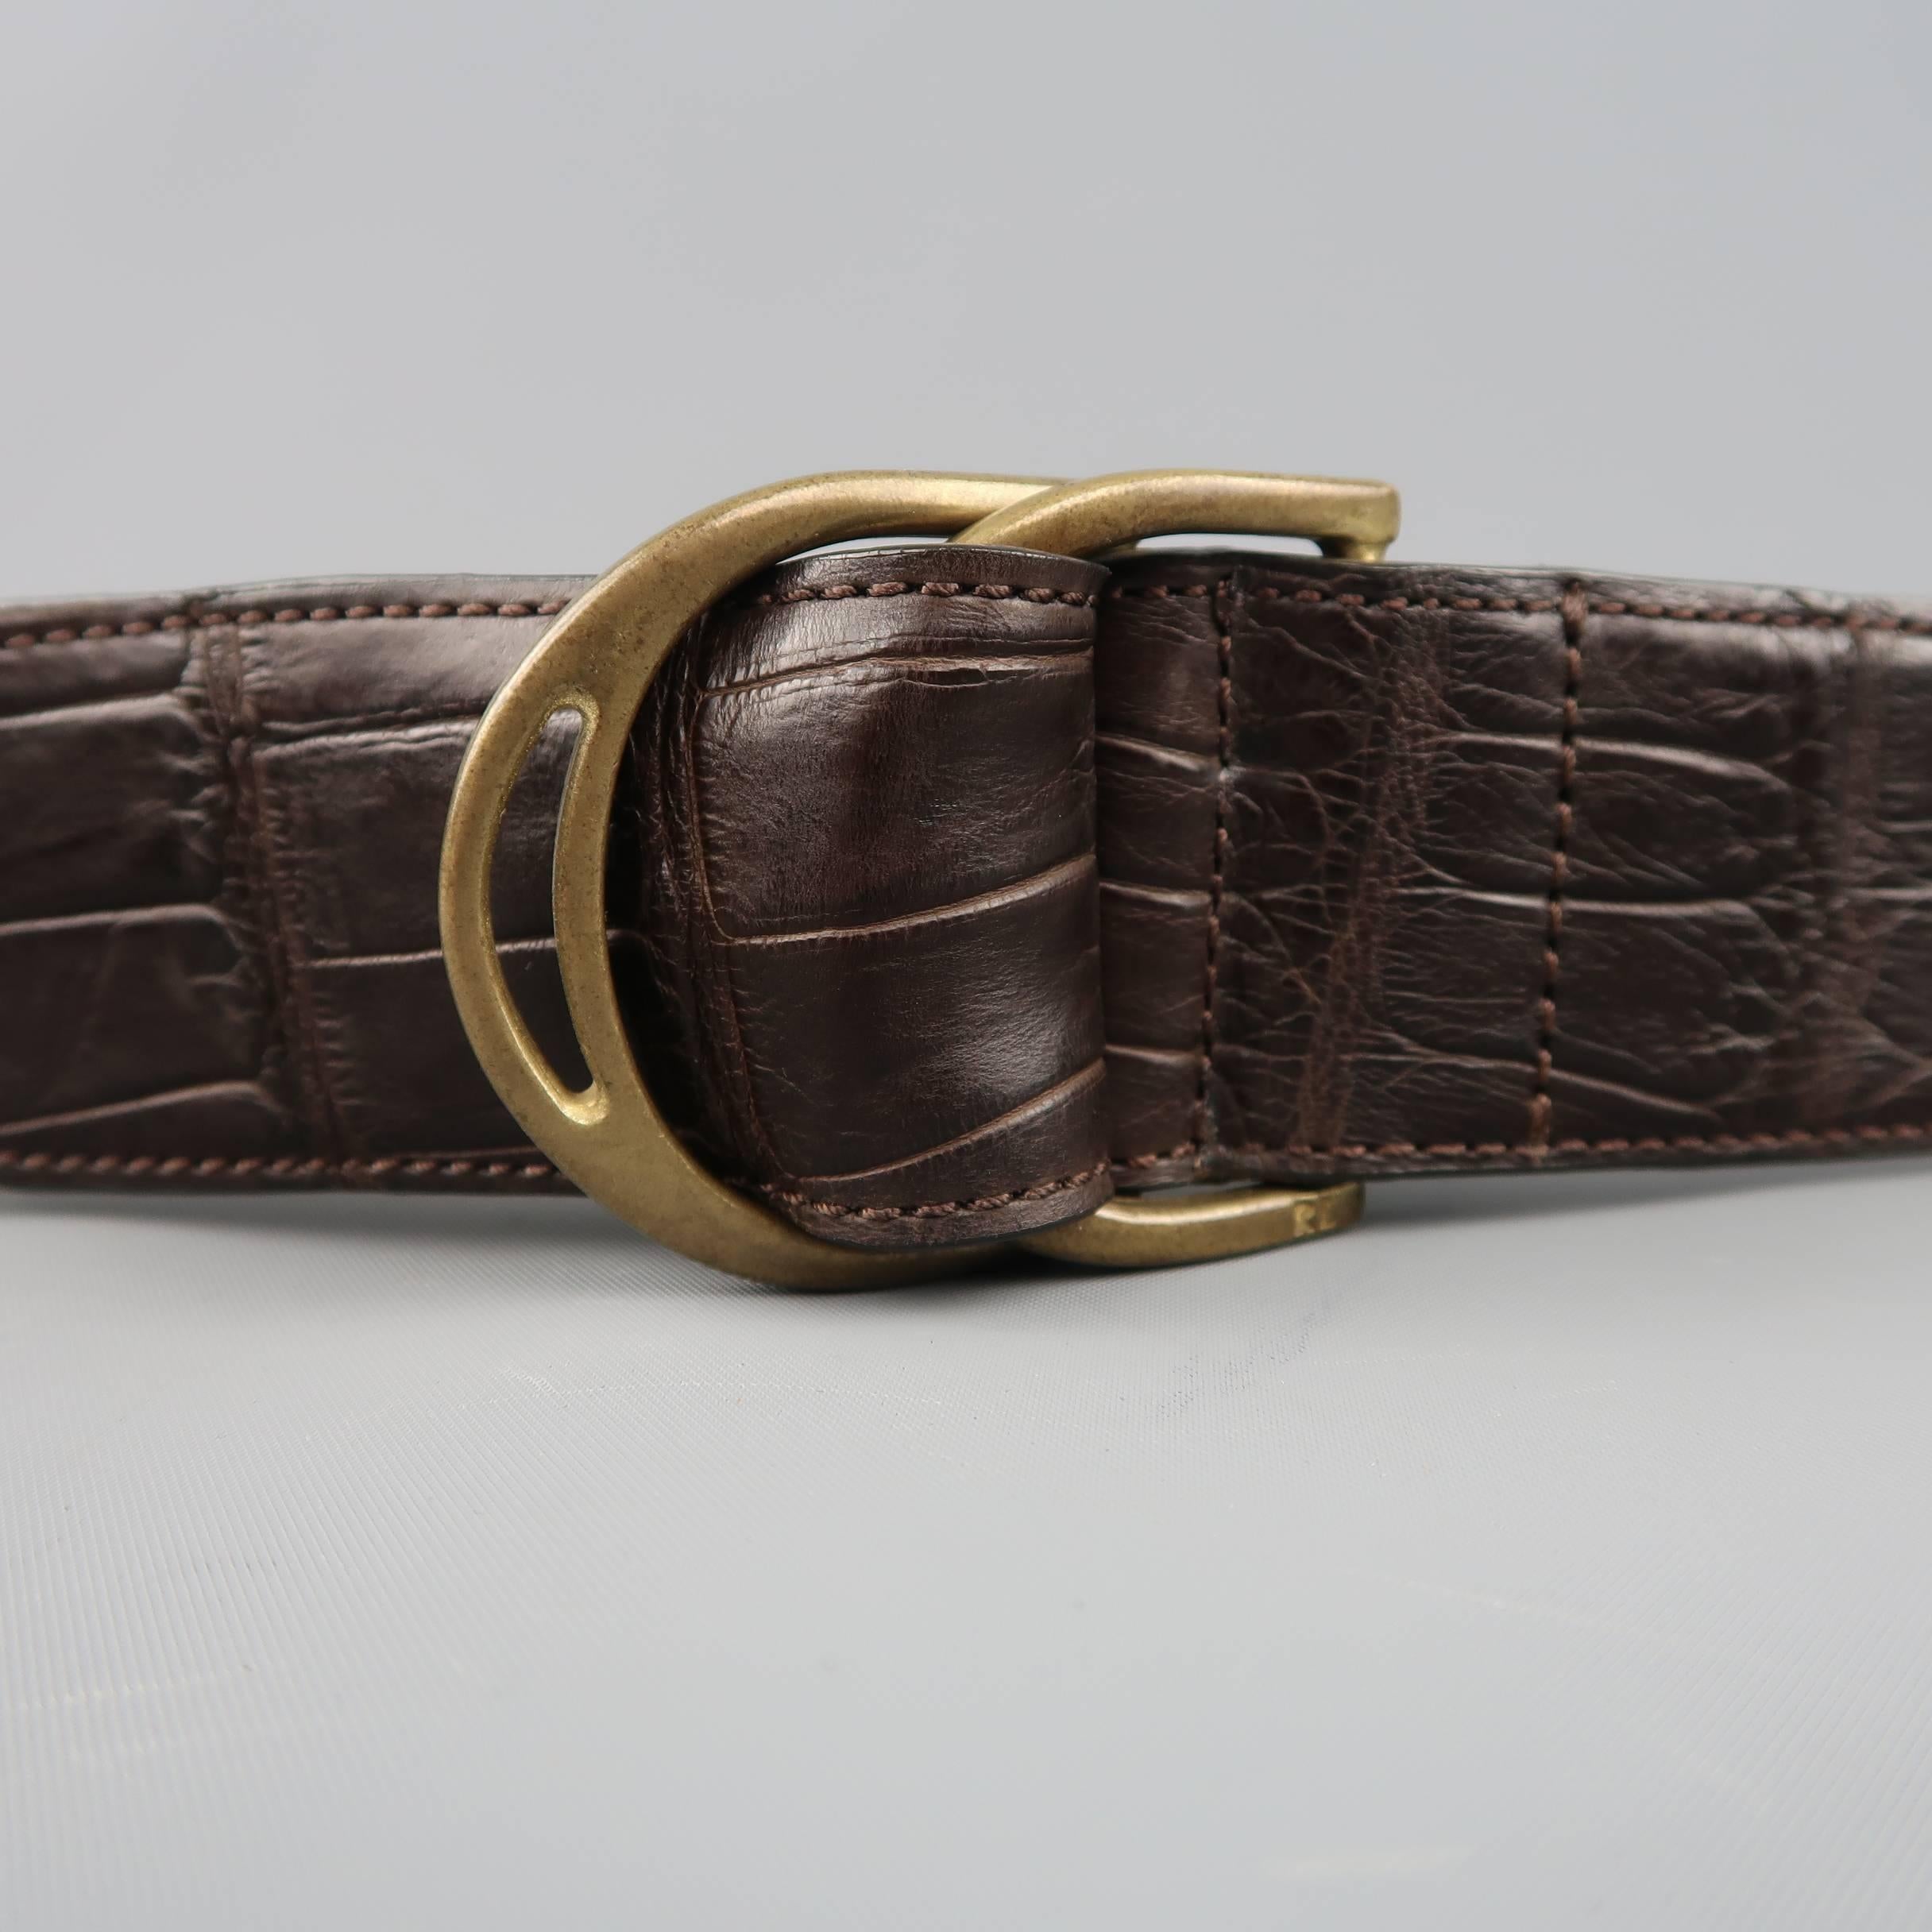 RALPH LAUREN belt comes in brown alligator leather with tan leather liner and double gold tone D ring loop closure. Made in Italy.
 
Excellent Pre-Owned Condition.
Marked: S
 
Measurements:
 
Length: 39 in.
Width: 1.5 in.
Fits: 32 in.
